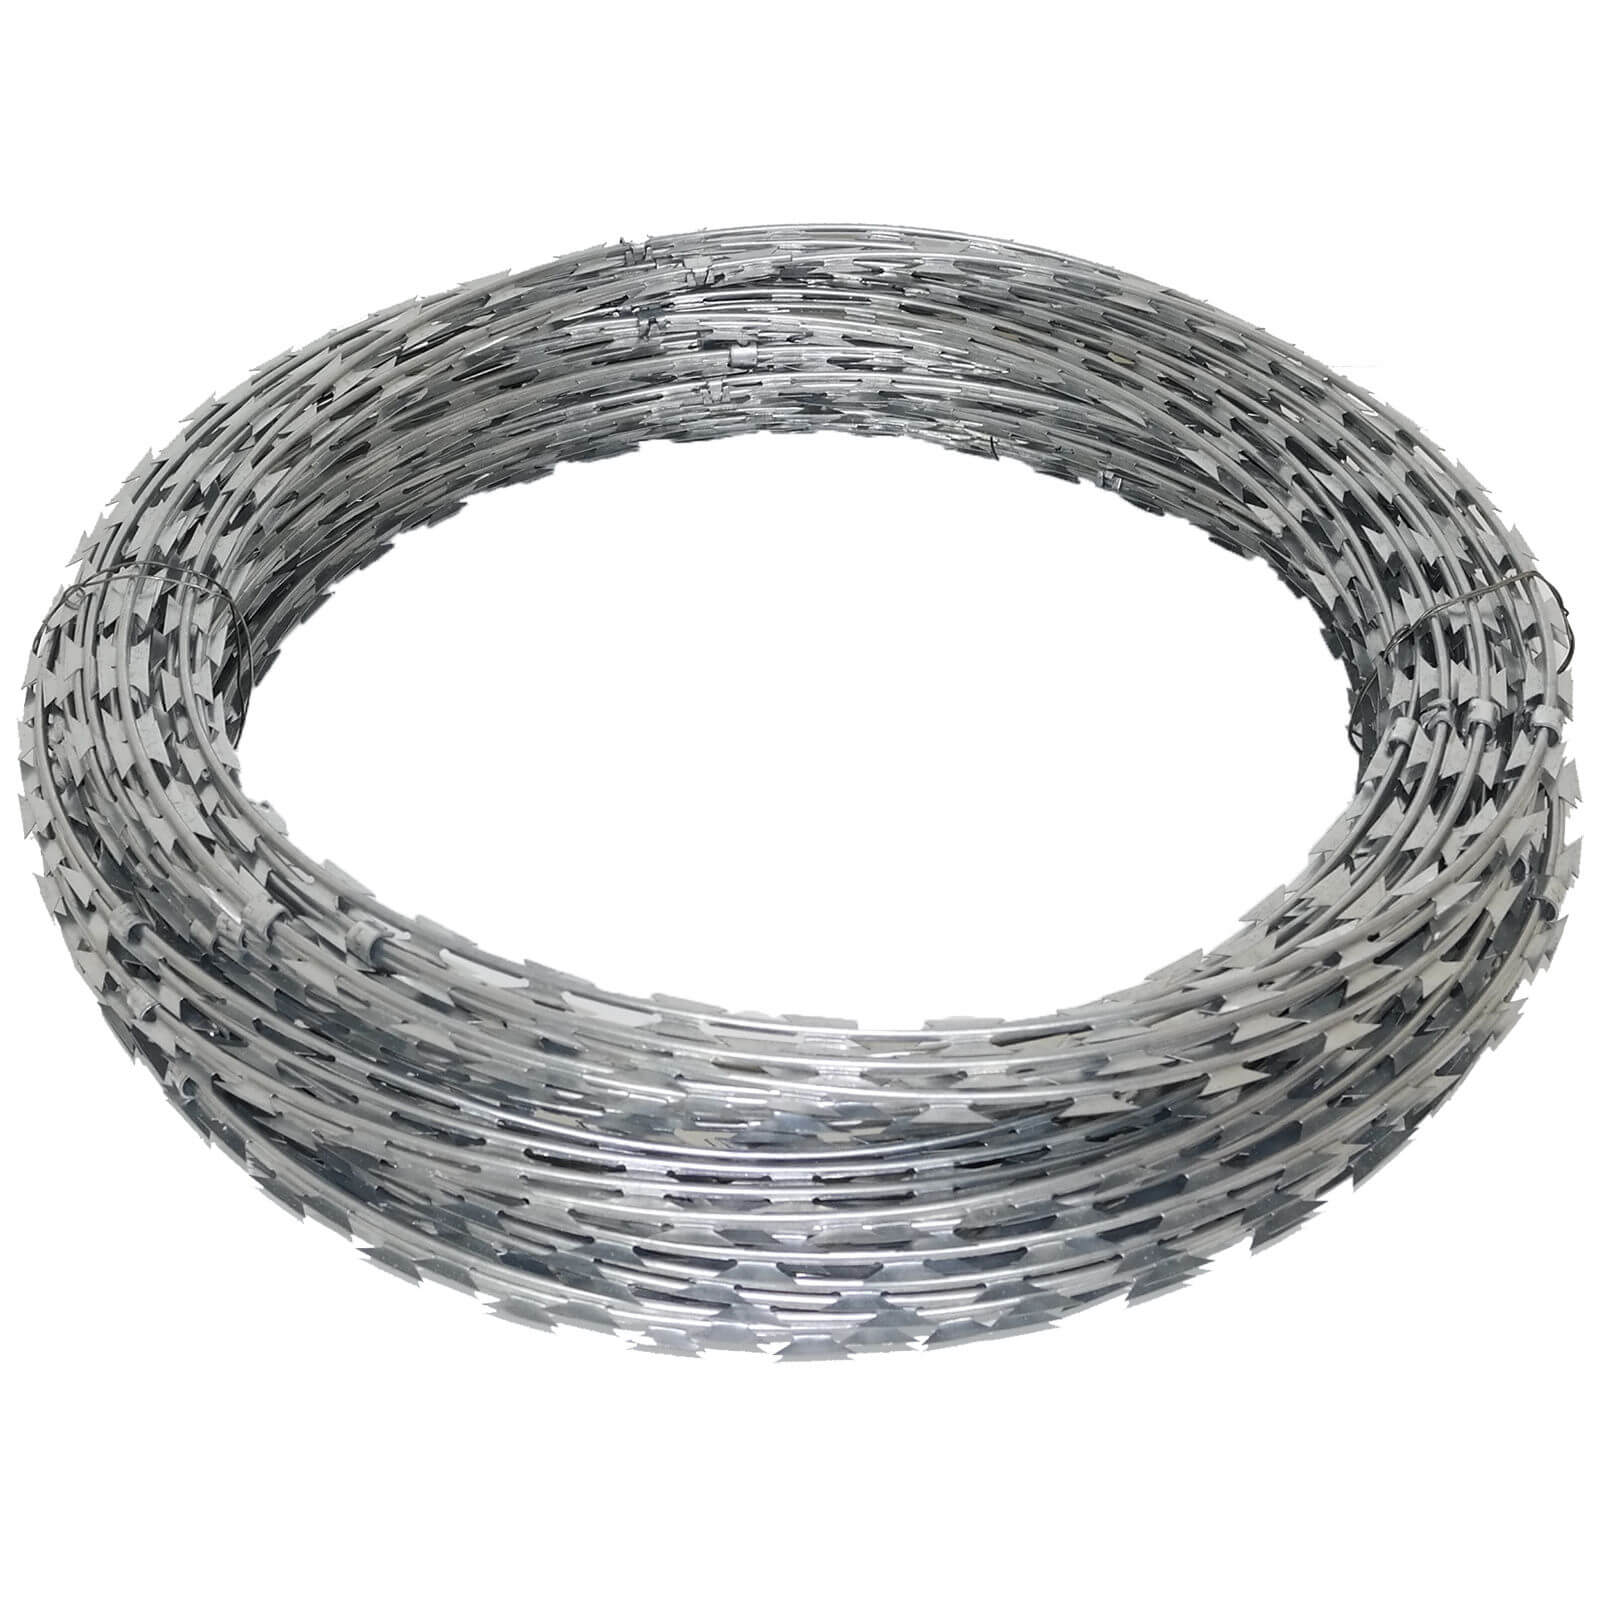 Razor wire fencing: the best solution for reliable security